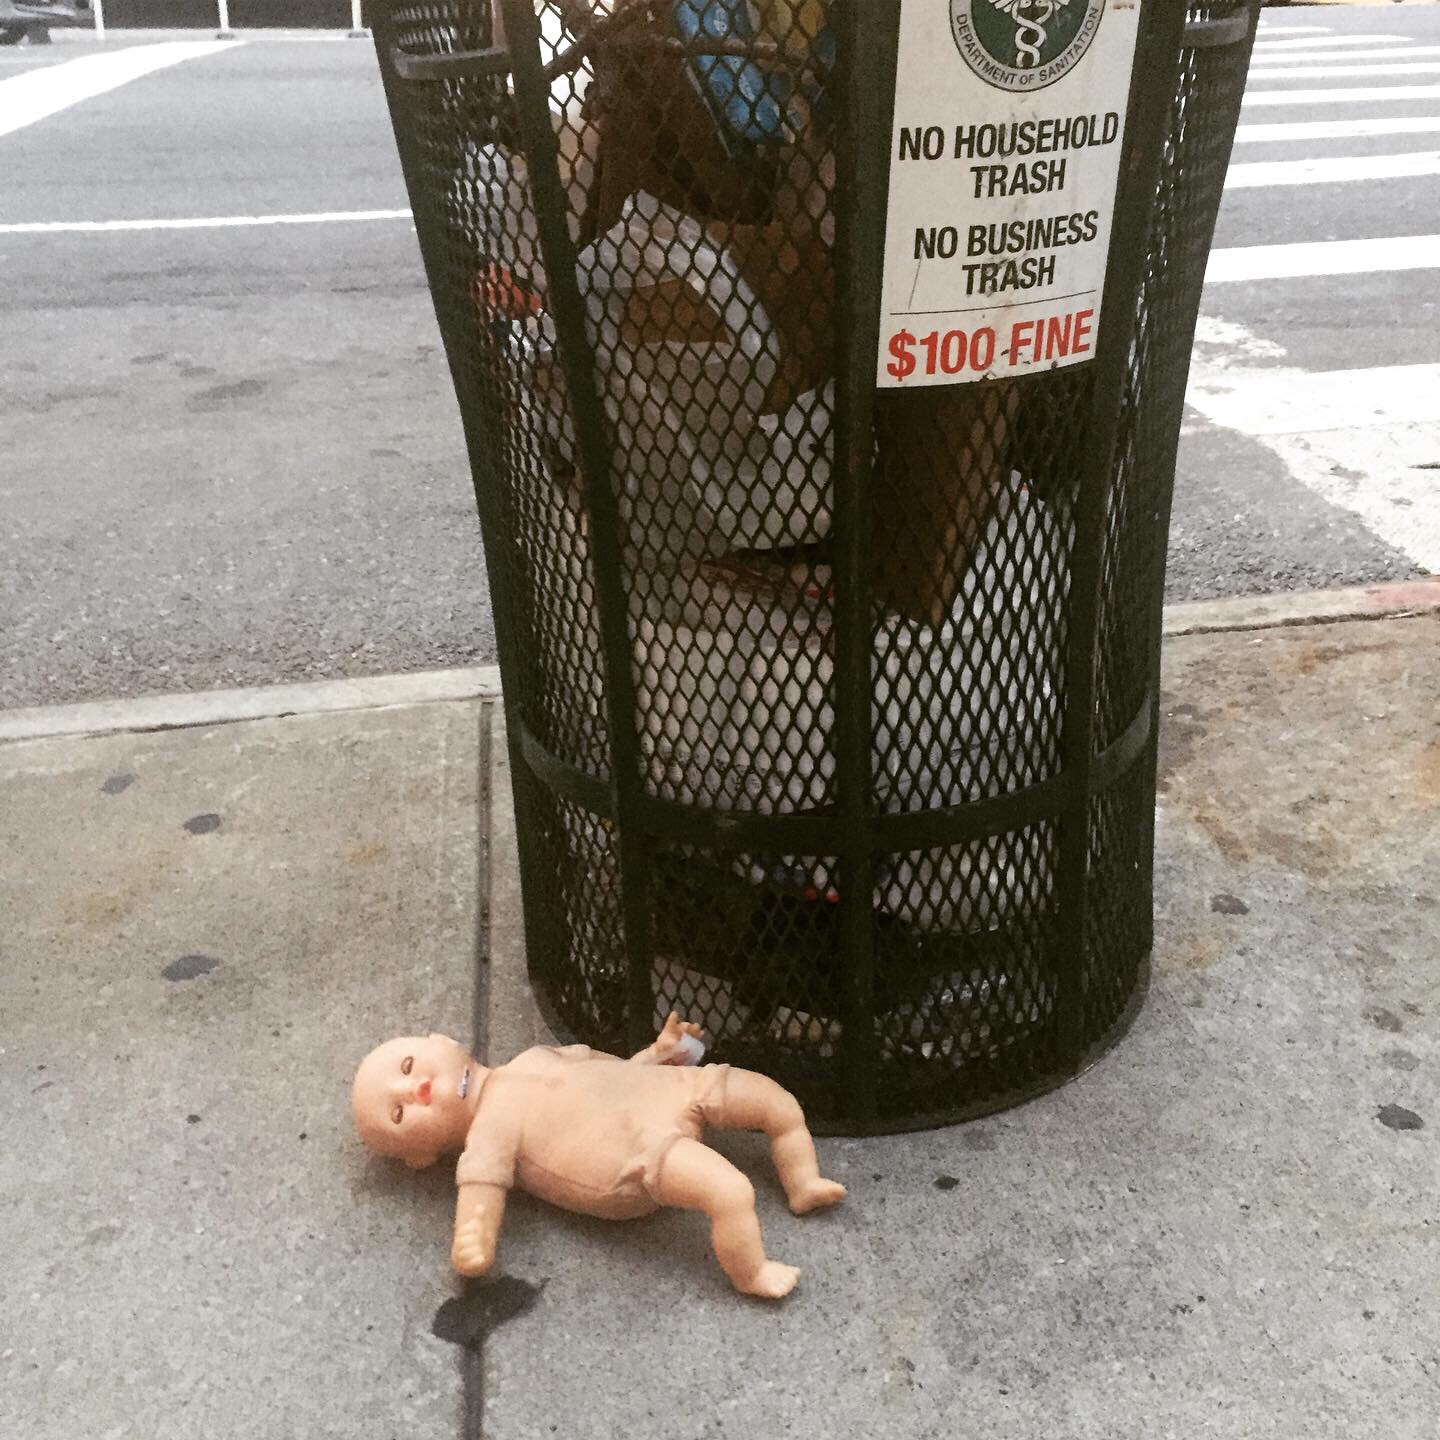 Abandoned baby doll next to NYC trash can.